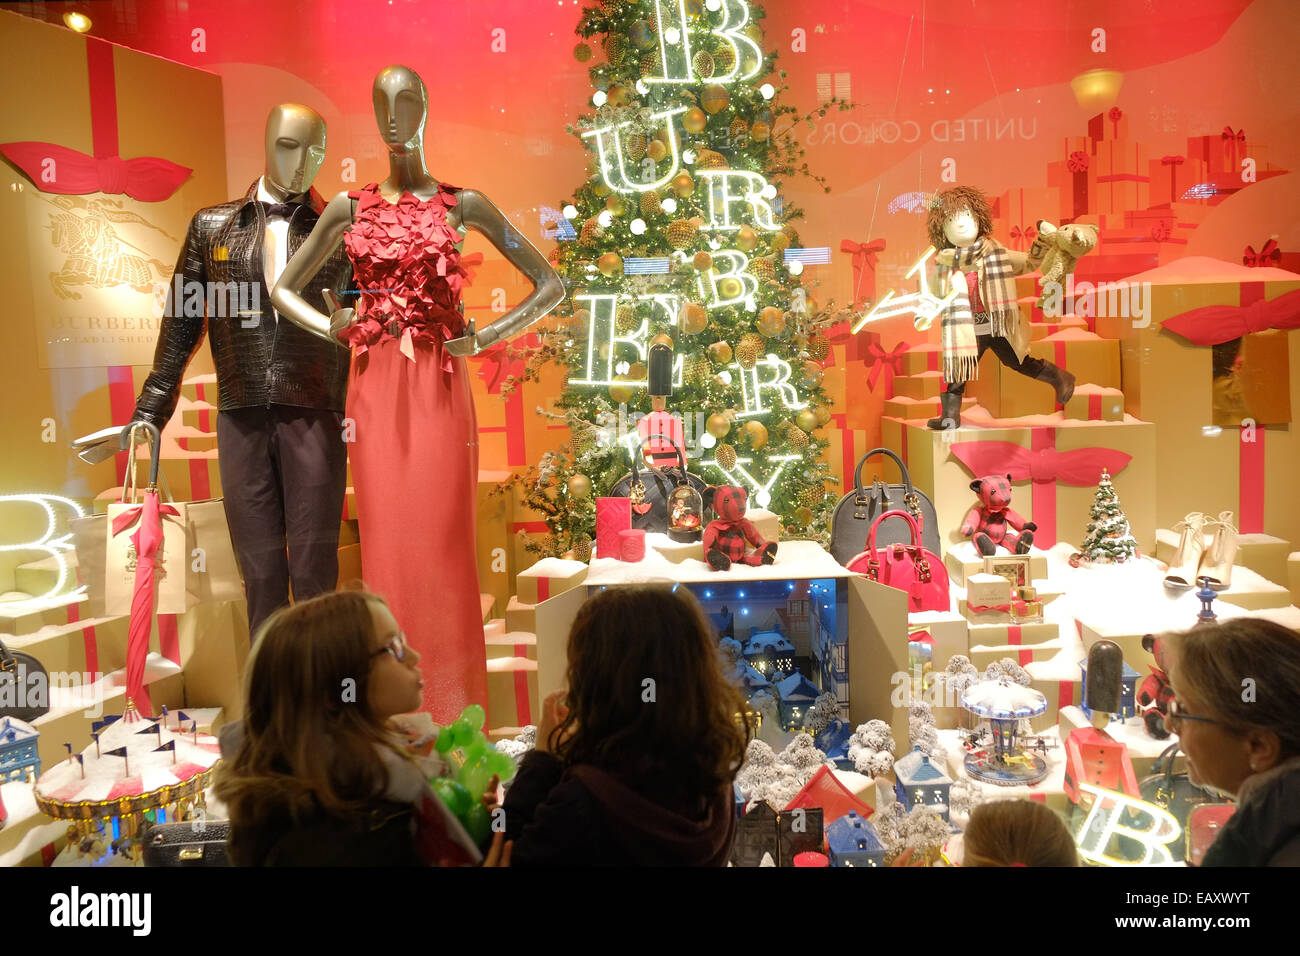 Paris, France. 21st Nov, 2014. Christmas decorations and shopping and  window shopping viewing Burberry display at Printemps department store in  Paris. Credit: Paul Quayle/Alamy Live News Stock Photo - Alamy